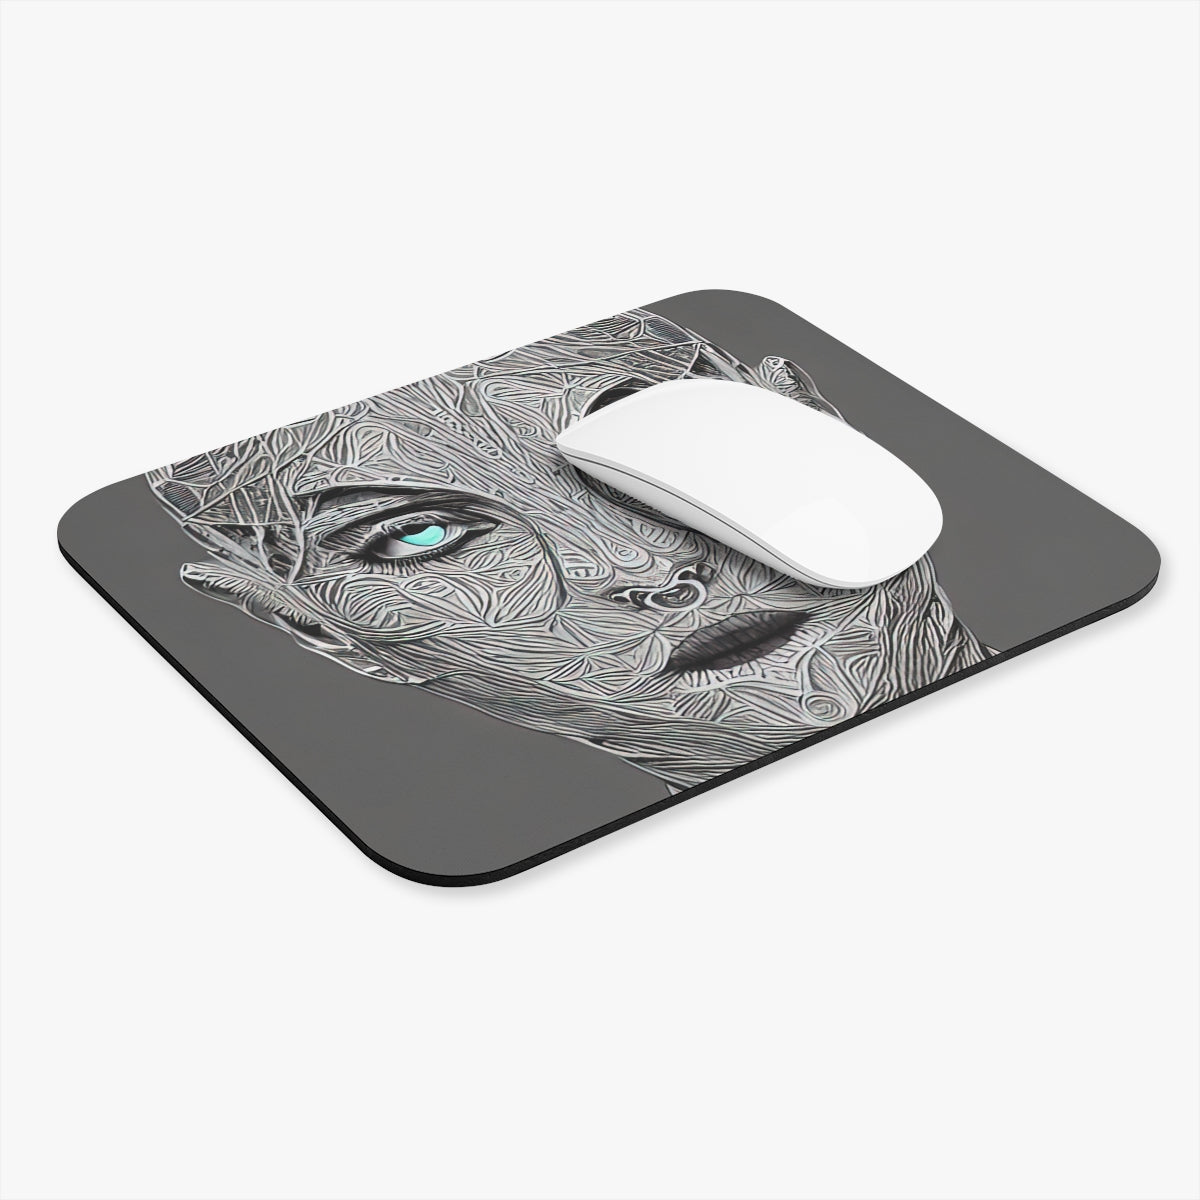 Mouse Pad | Abstract Girl (Rectangle)